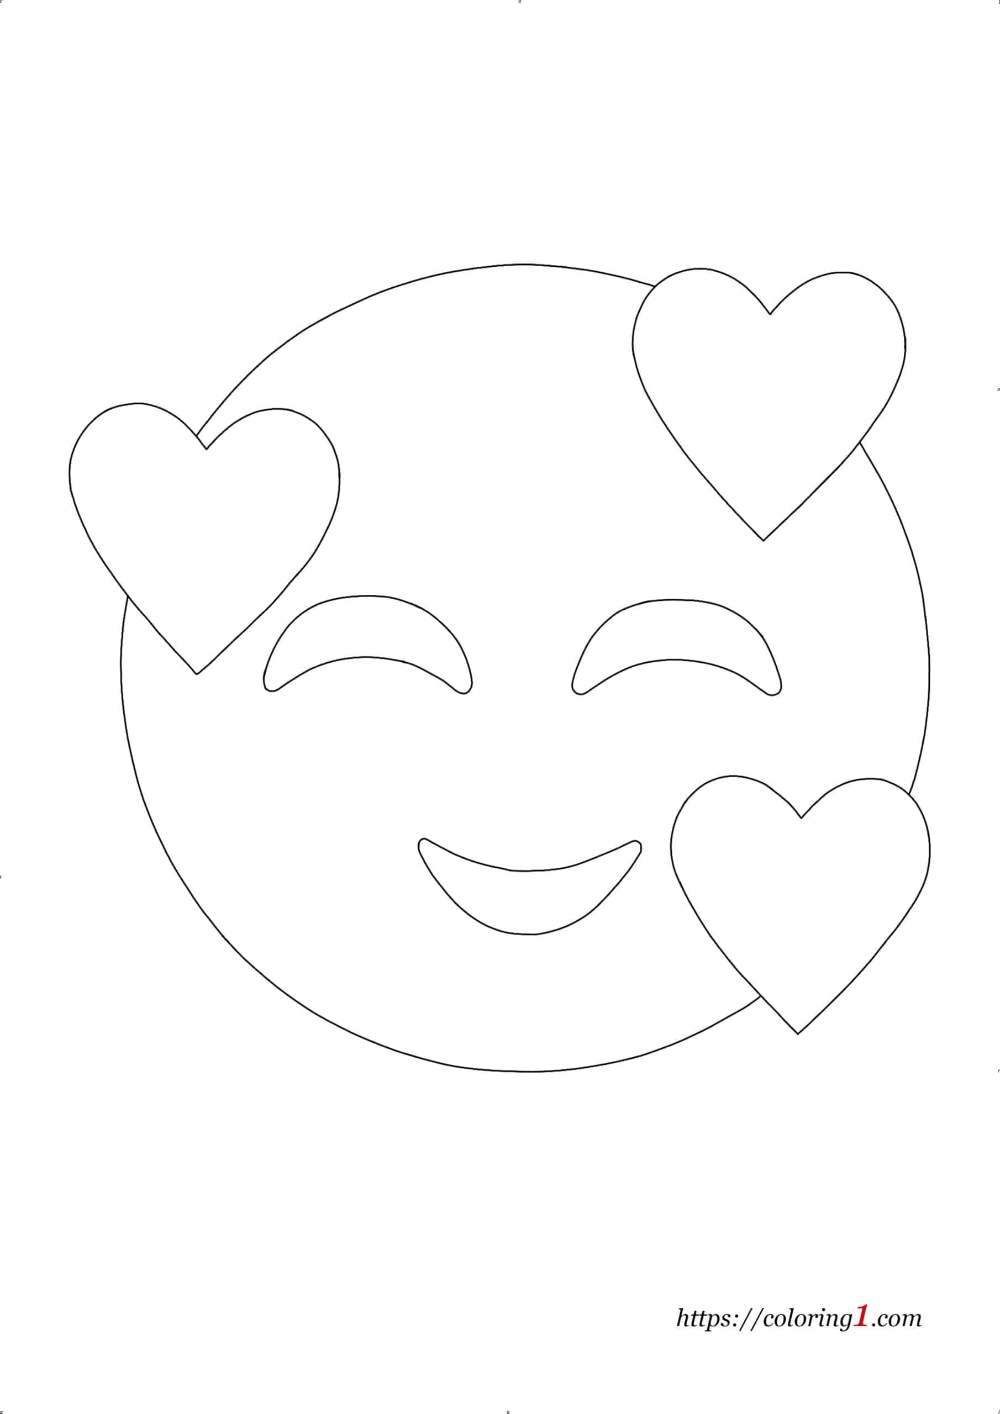 Heart emoji coloring pages